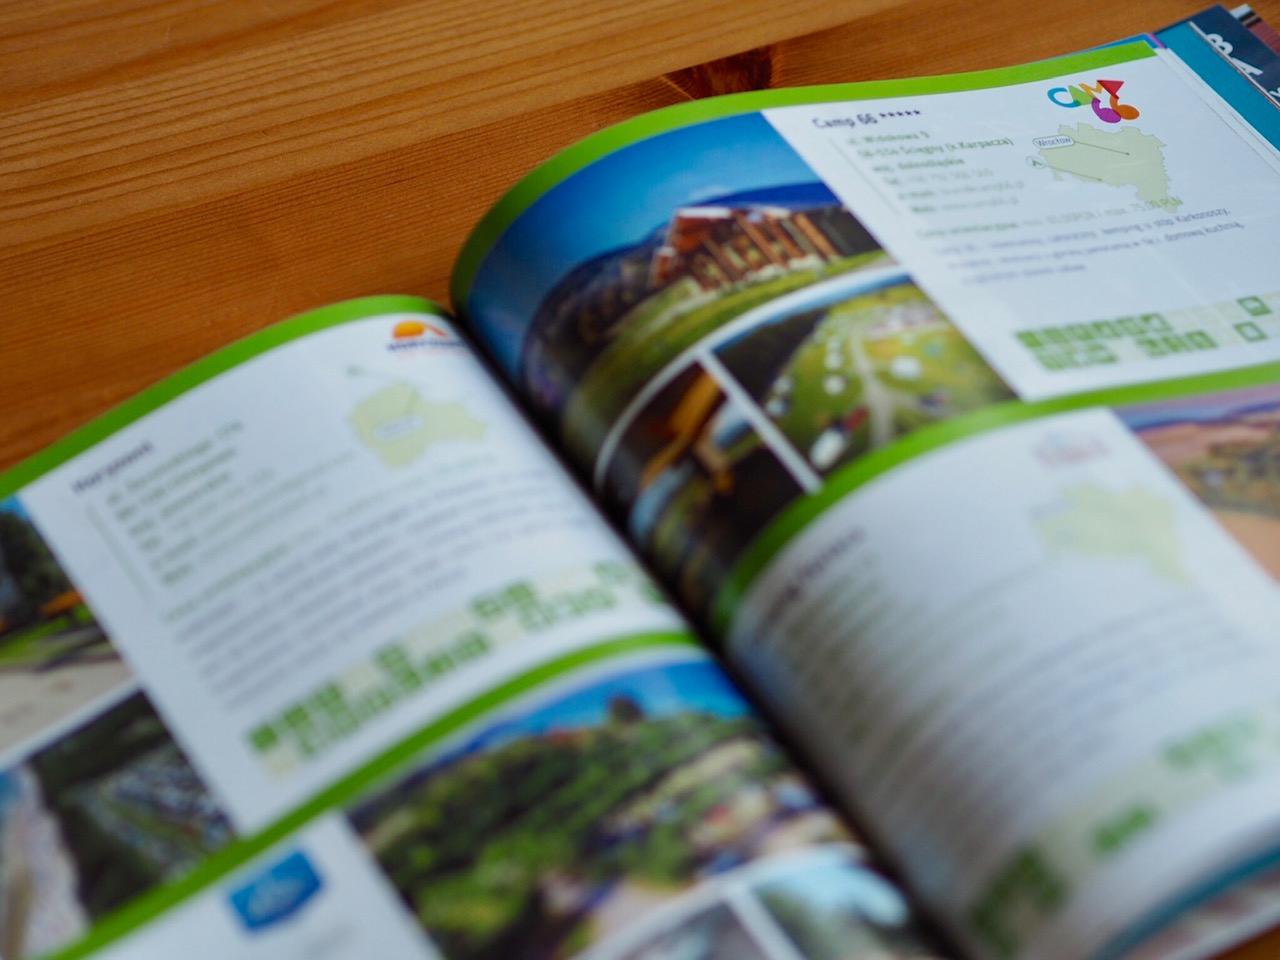 The &quot;Campings of Europe 2019&quot; guide - how to get it? – image 4